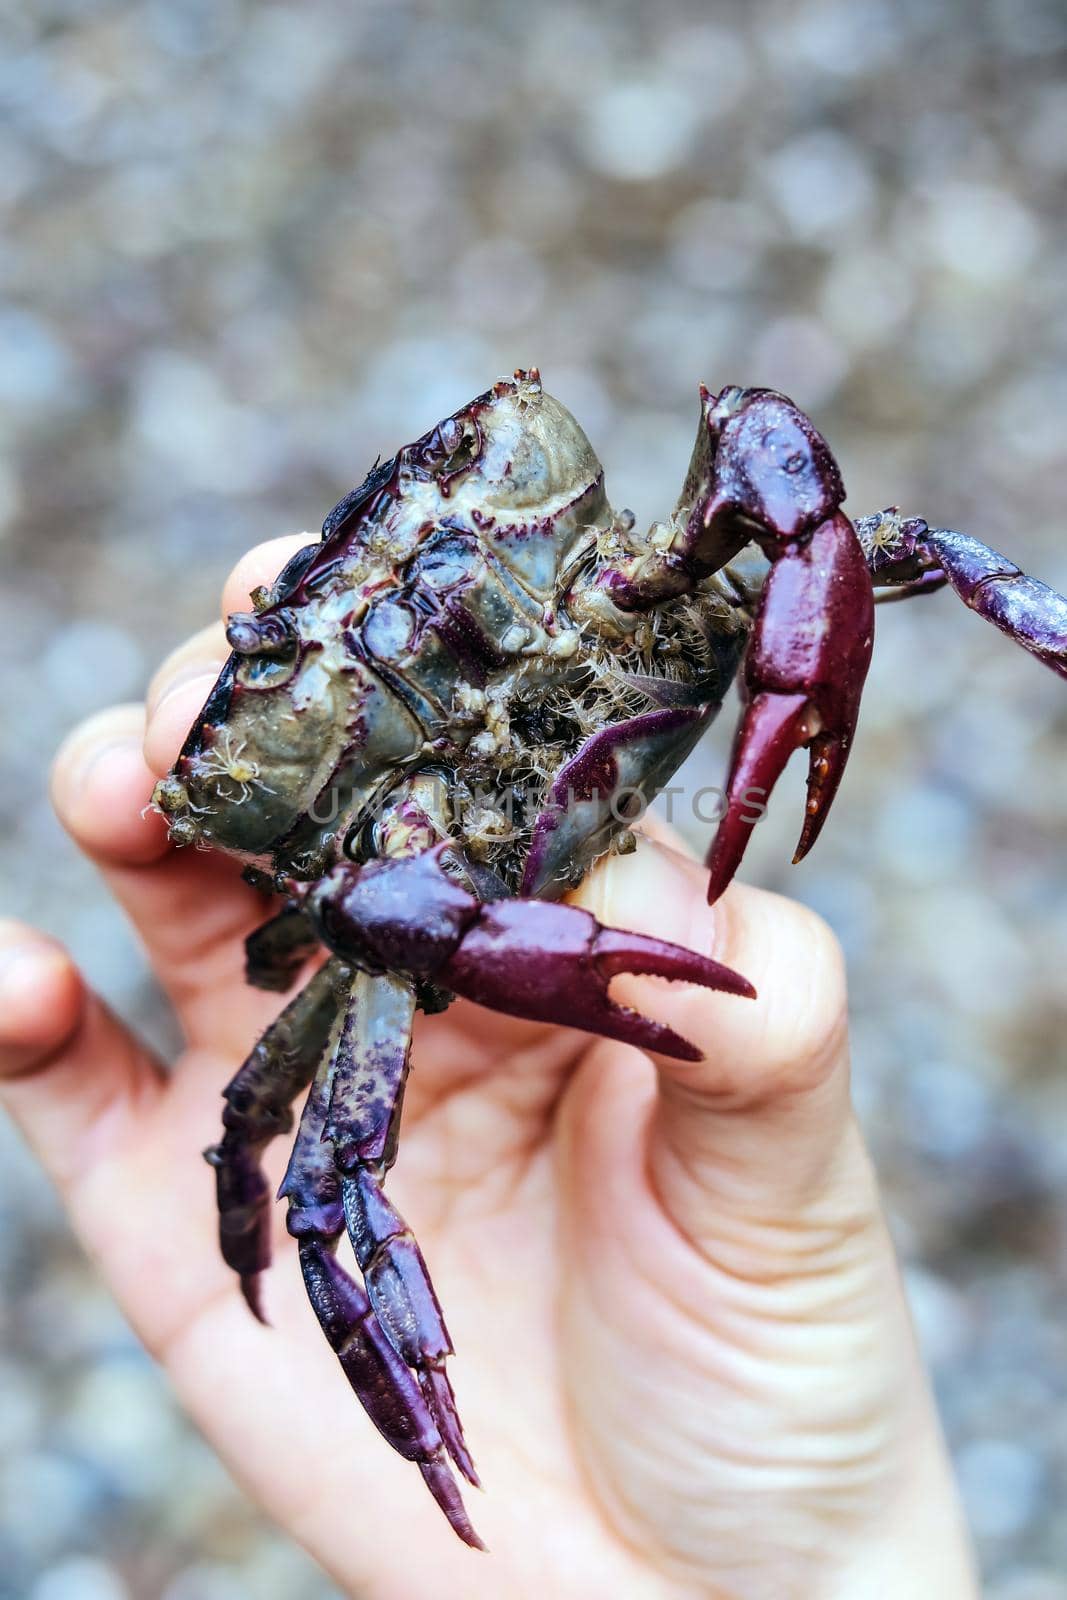 Image of Field crab in hand